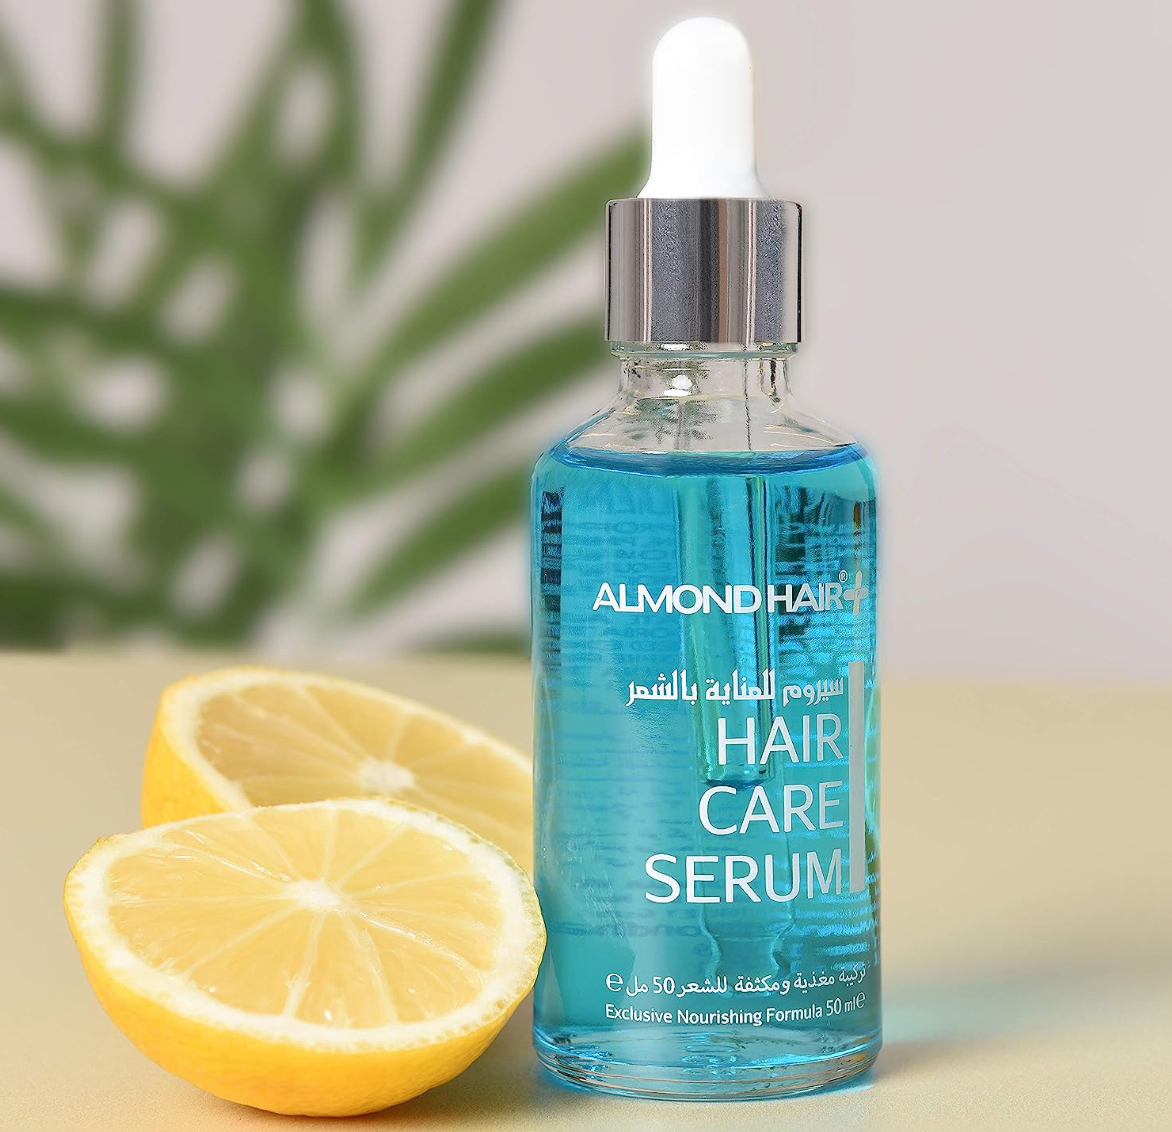 Almond Hair Care Growth Regrowth Serum - Regrowth In Balding And Hair Loss Treatment (Man)